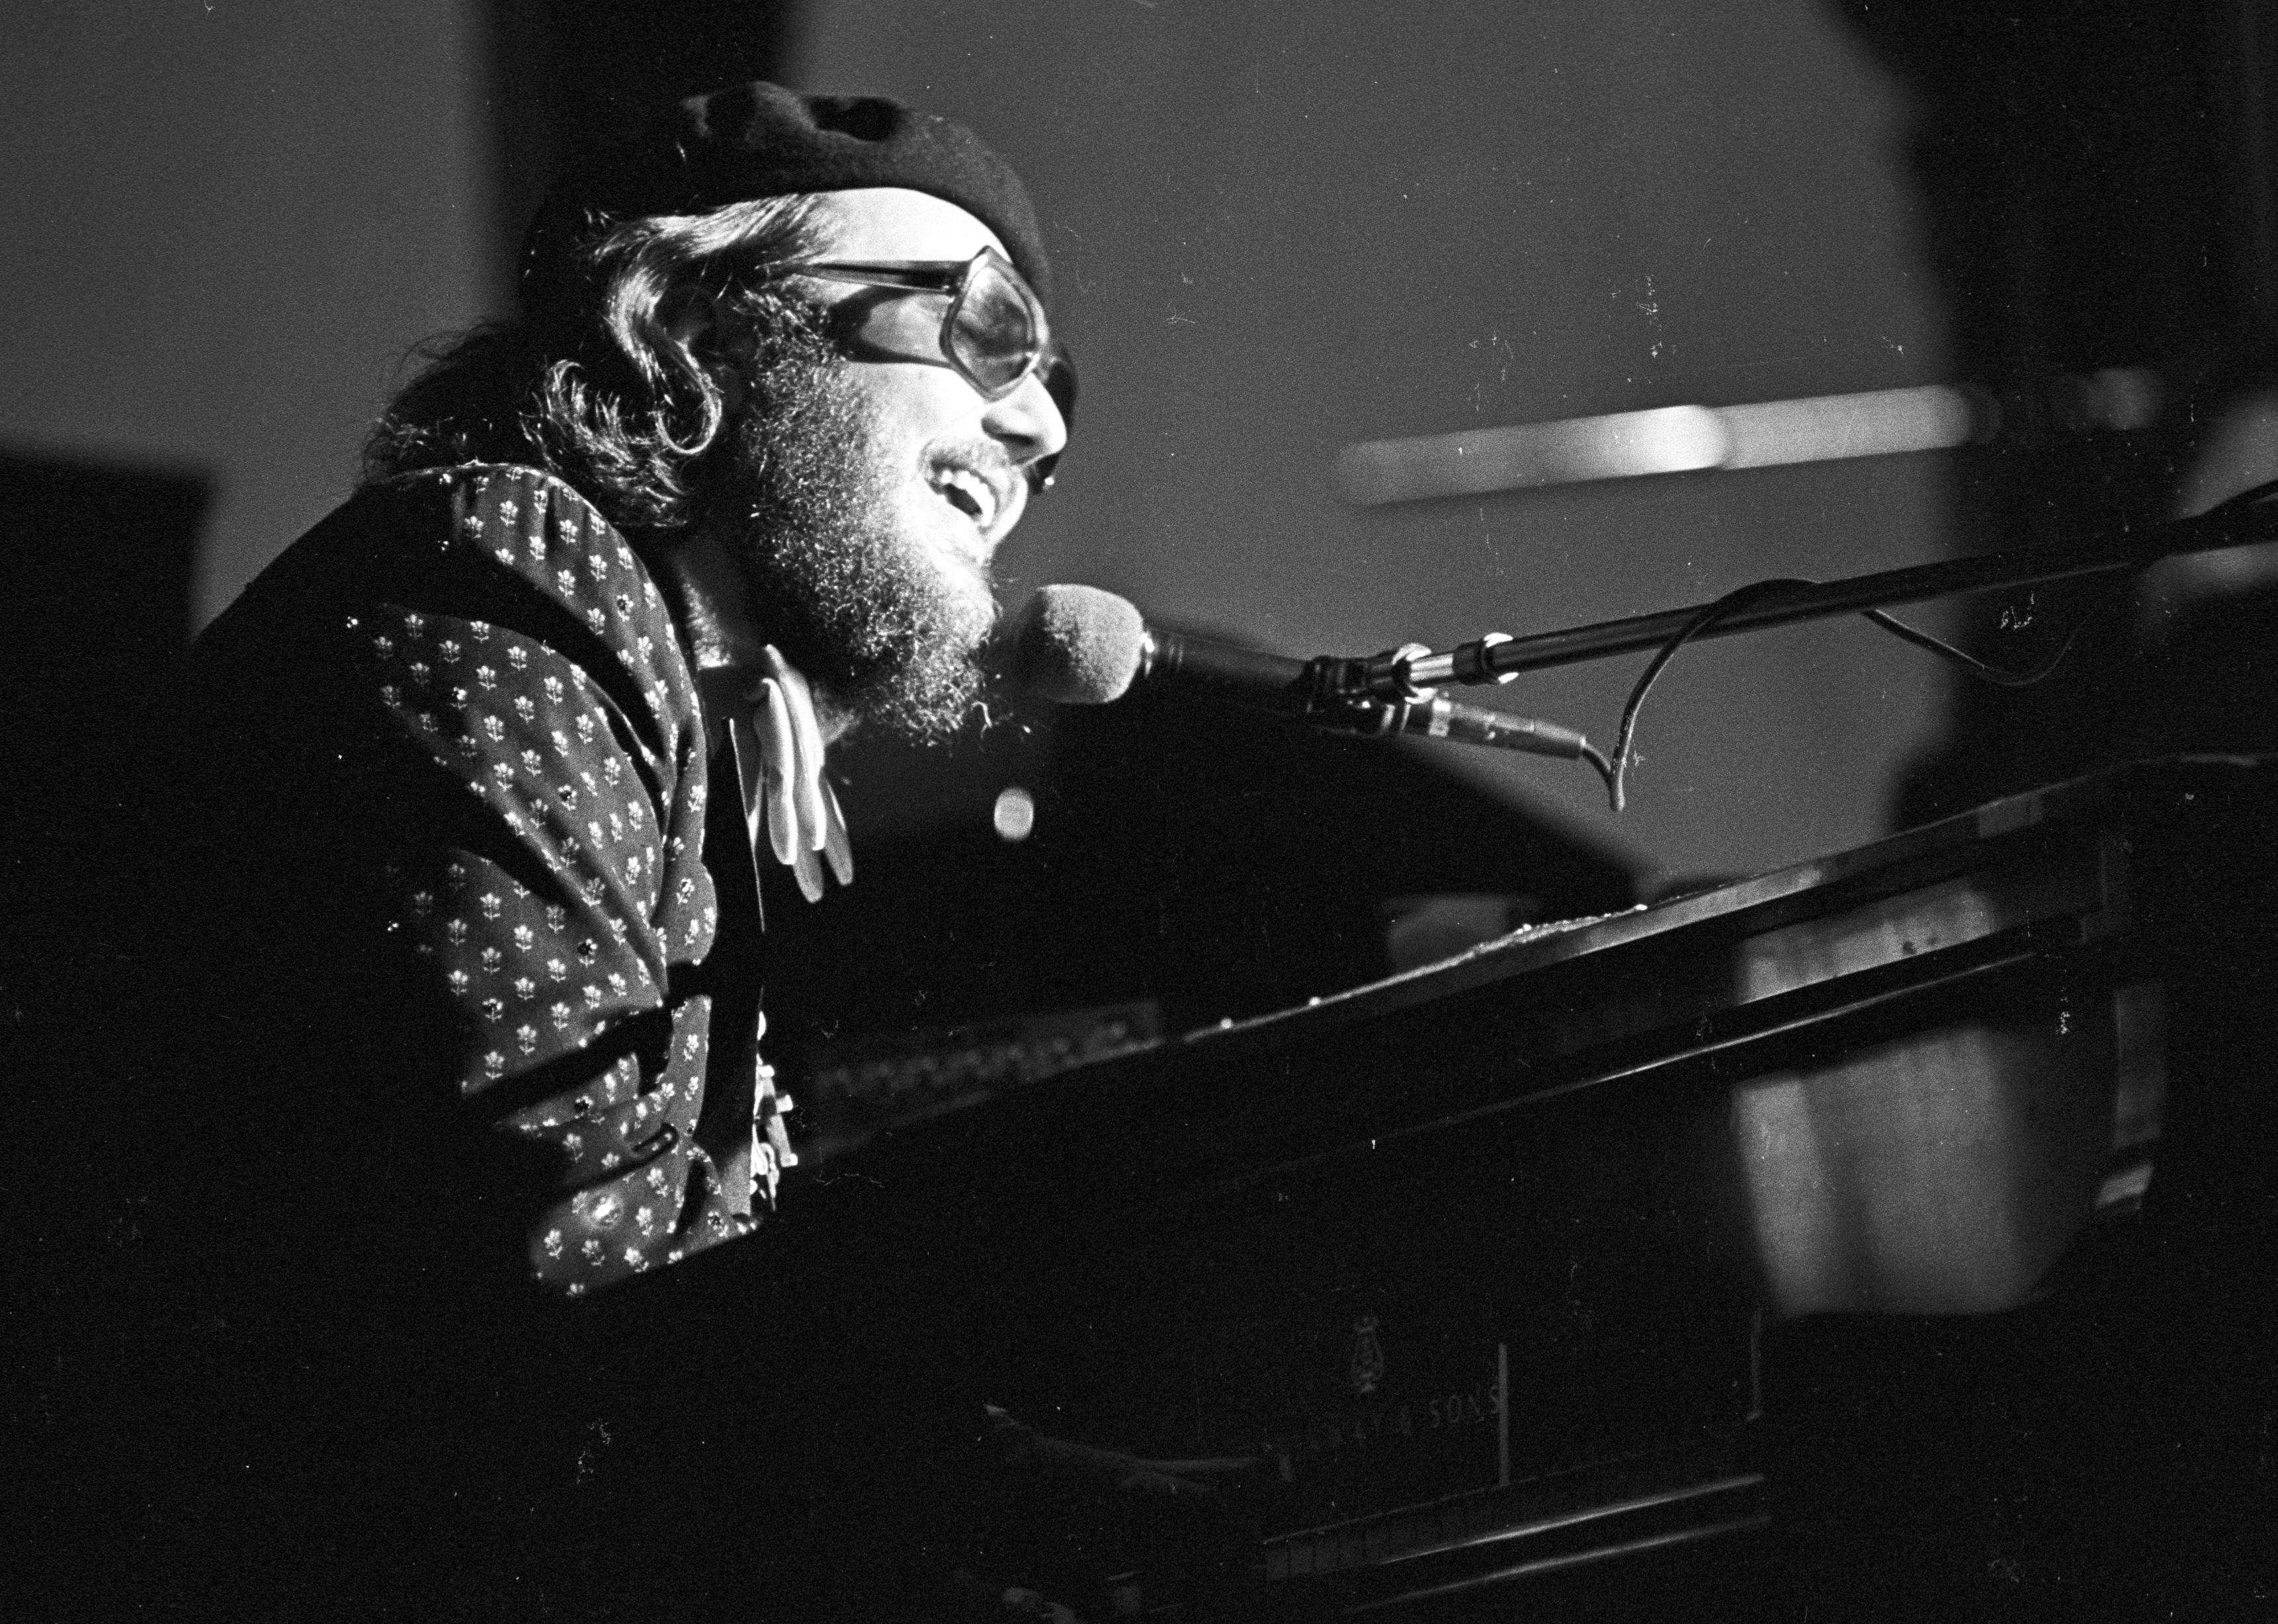 Dr. John performs on stage at The Band